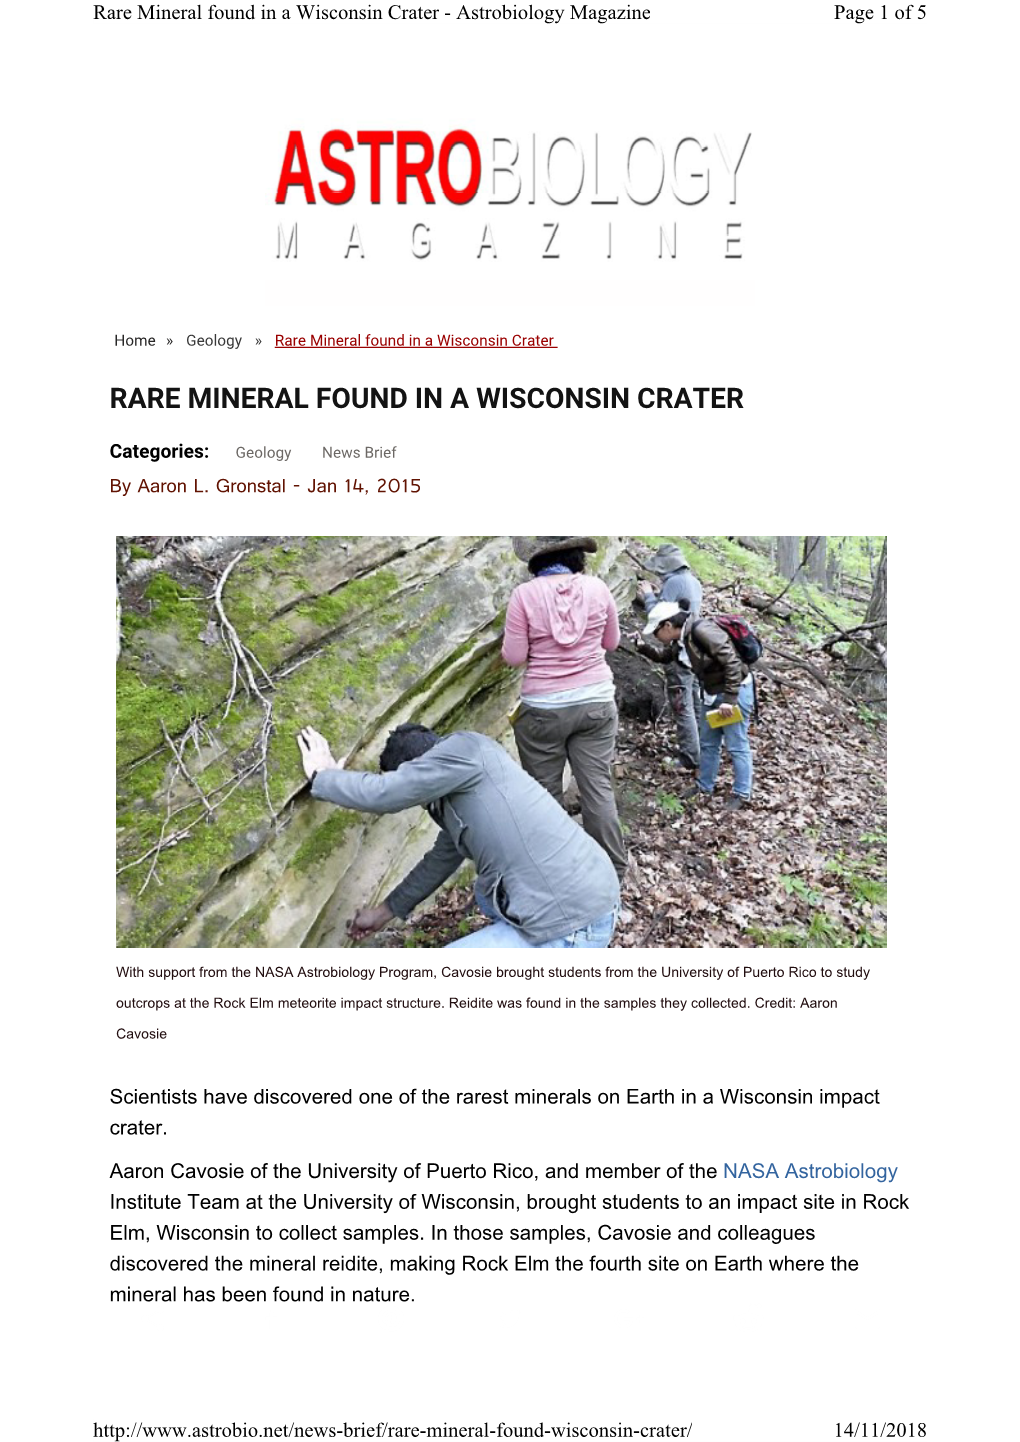 Rare Mineral Found in a Wisconsin Crater - Astrobiology Magazine Page 1 of 5